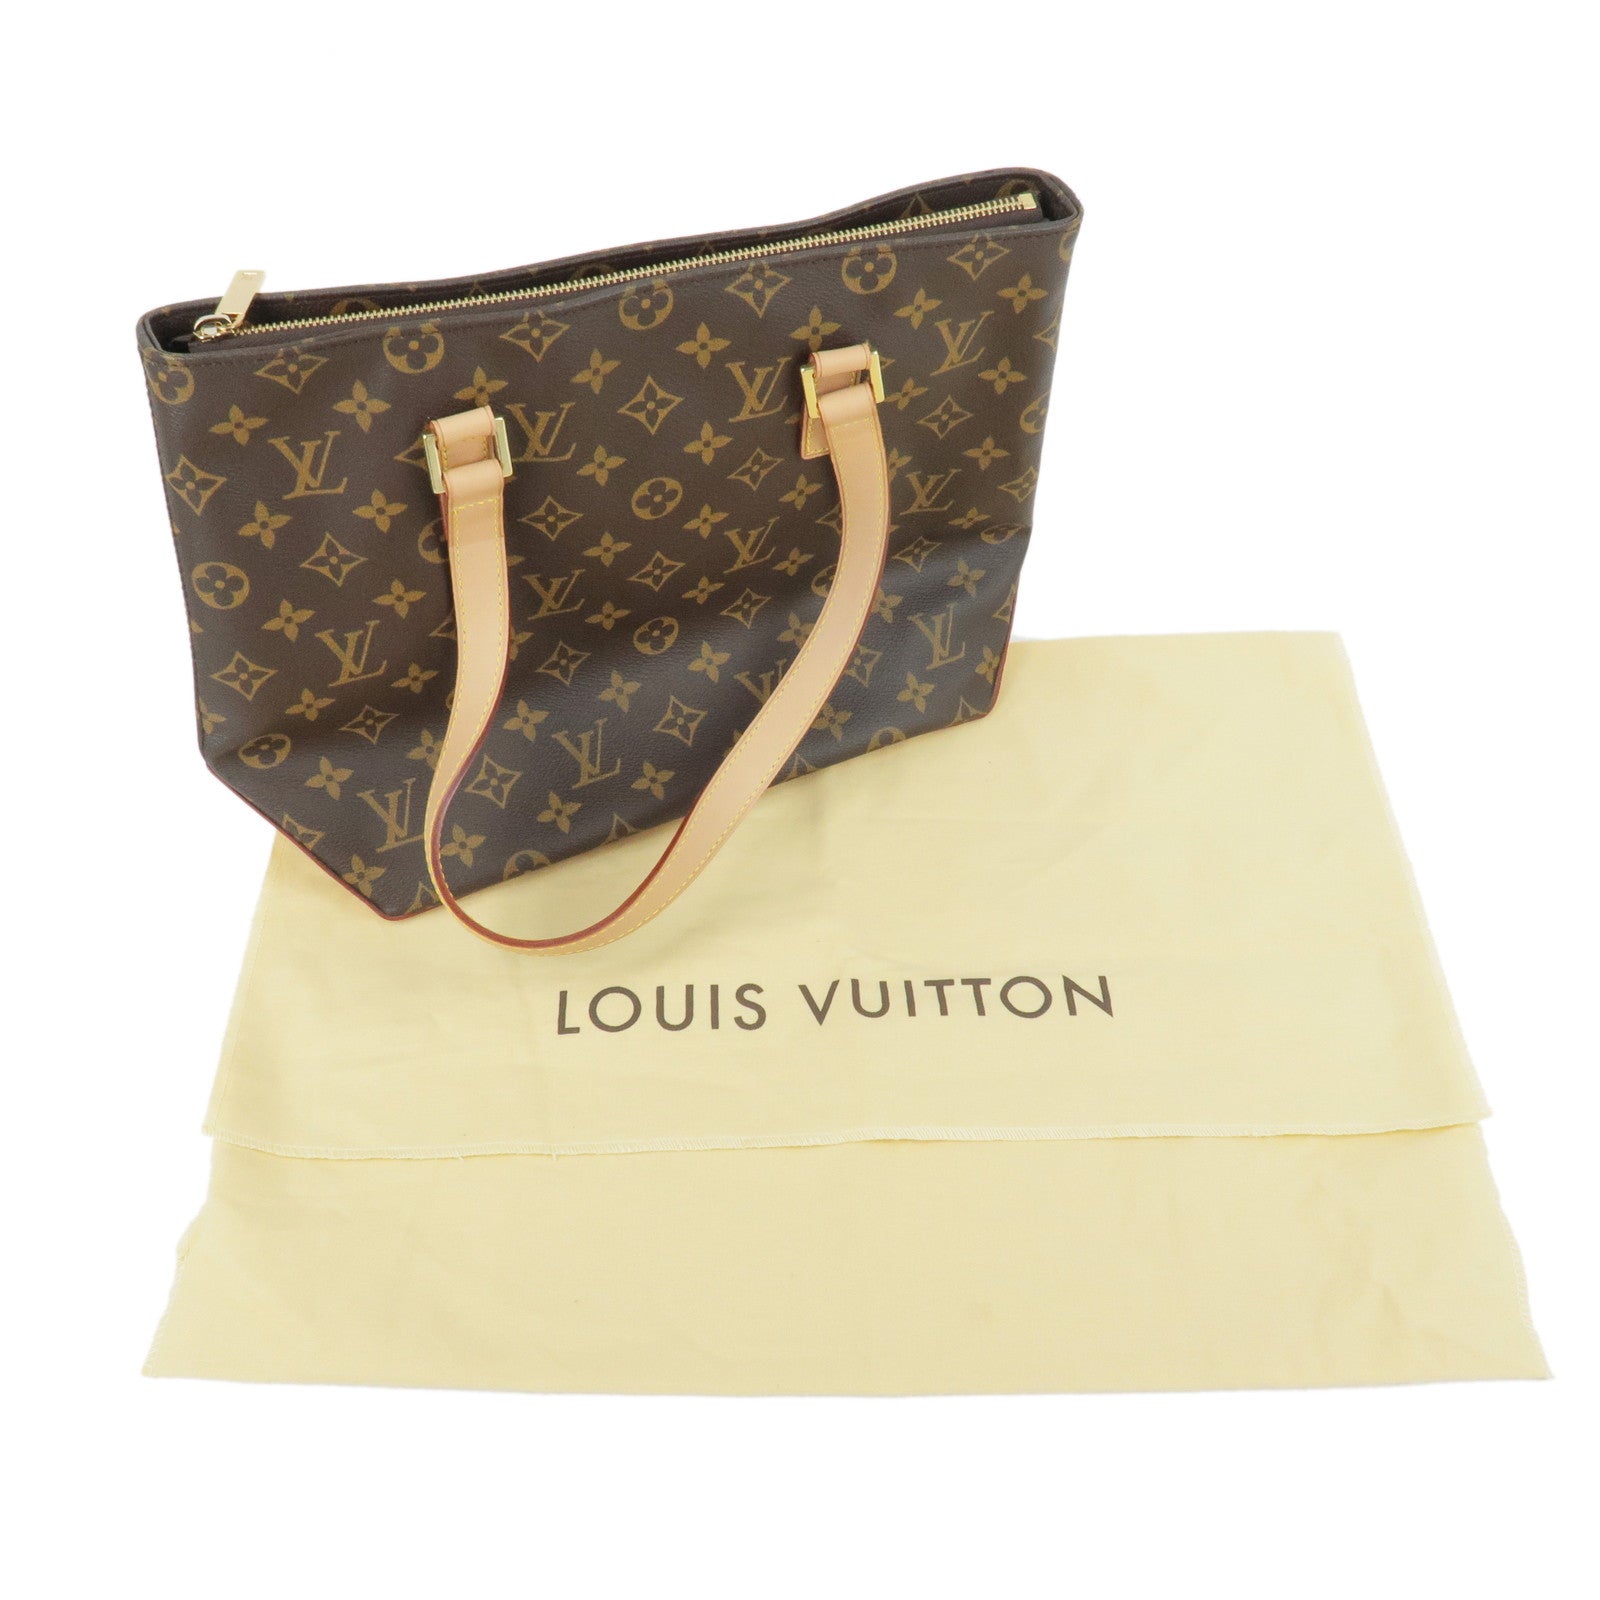 Monogram - Vuitton - Piano - Cabas - Louis Vuitton 2018 pre-owned All-In PM  tote bag - M51148 – dct - Tote - ep_vintage luxury Store - Louis - Bag